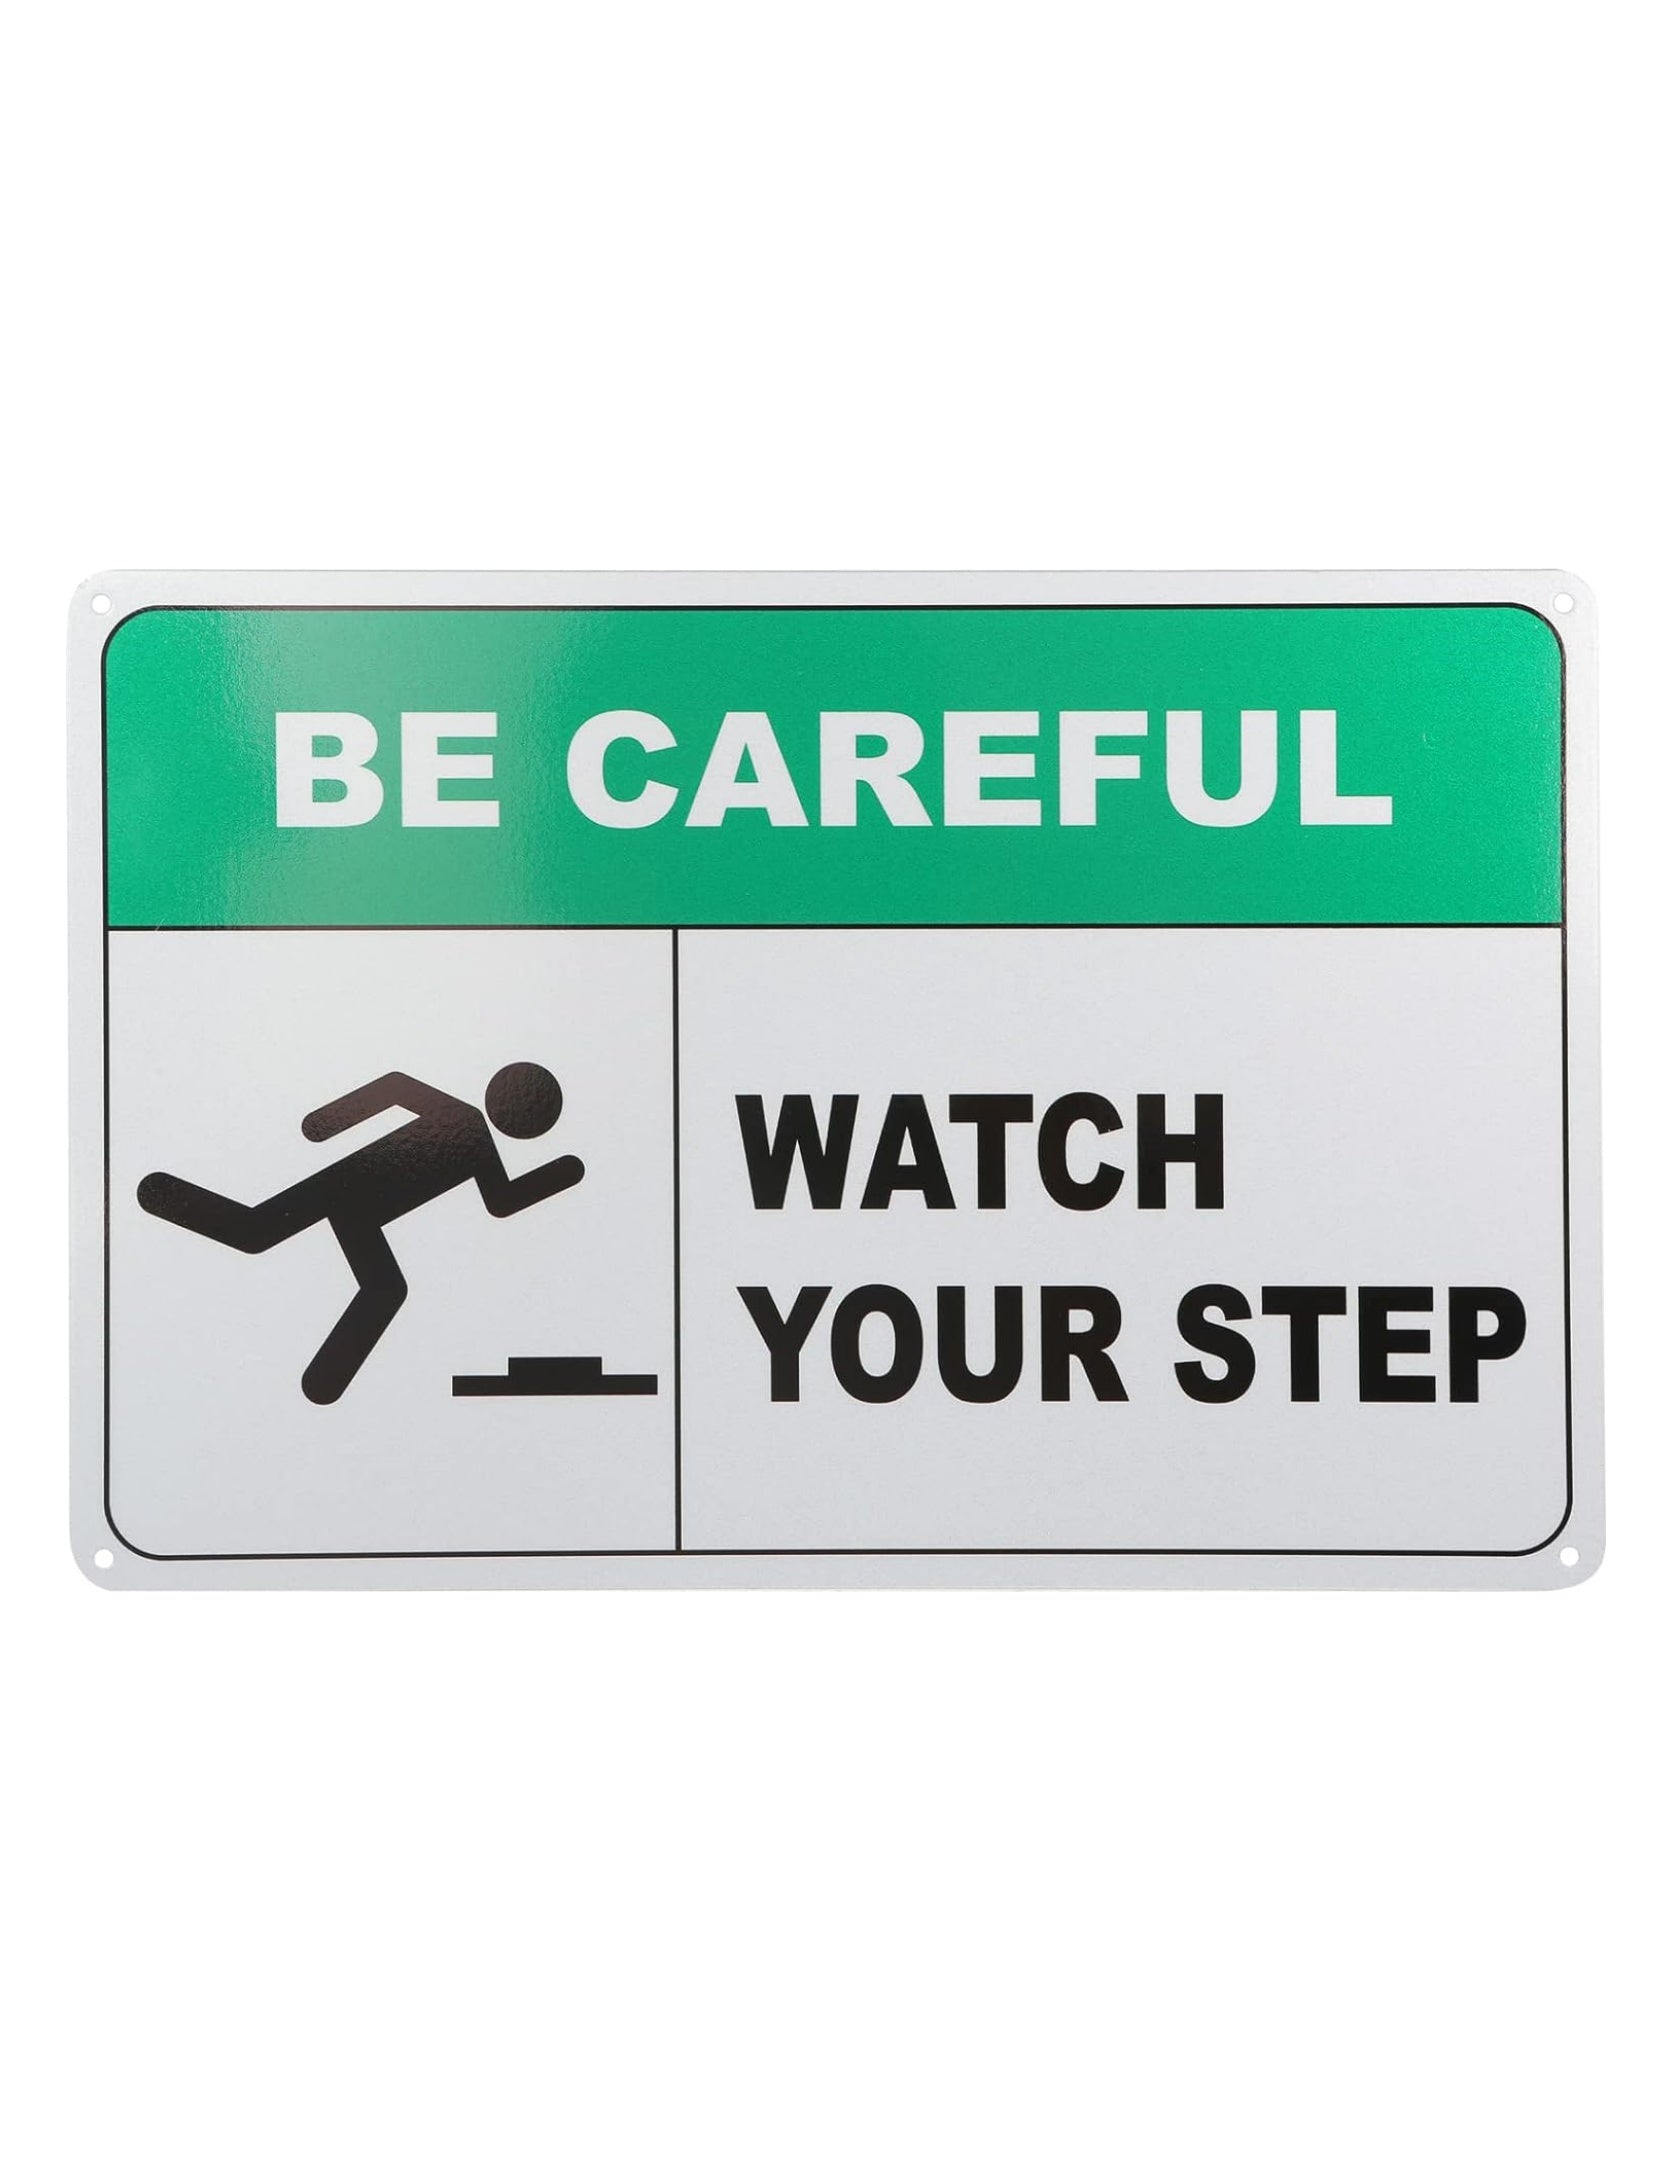 THTEN Caution Watch Your Step Sign,Safety Sign,12" x 8" Rust Free Aluminum,Easy Mounting Indoor Outdoor Use,UV Protected and Waterproof, Weather Resistant and Durable Ink